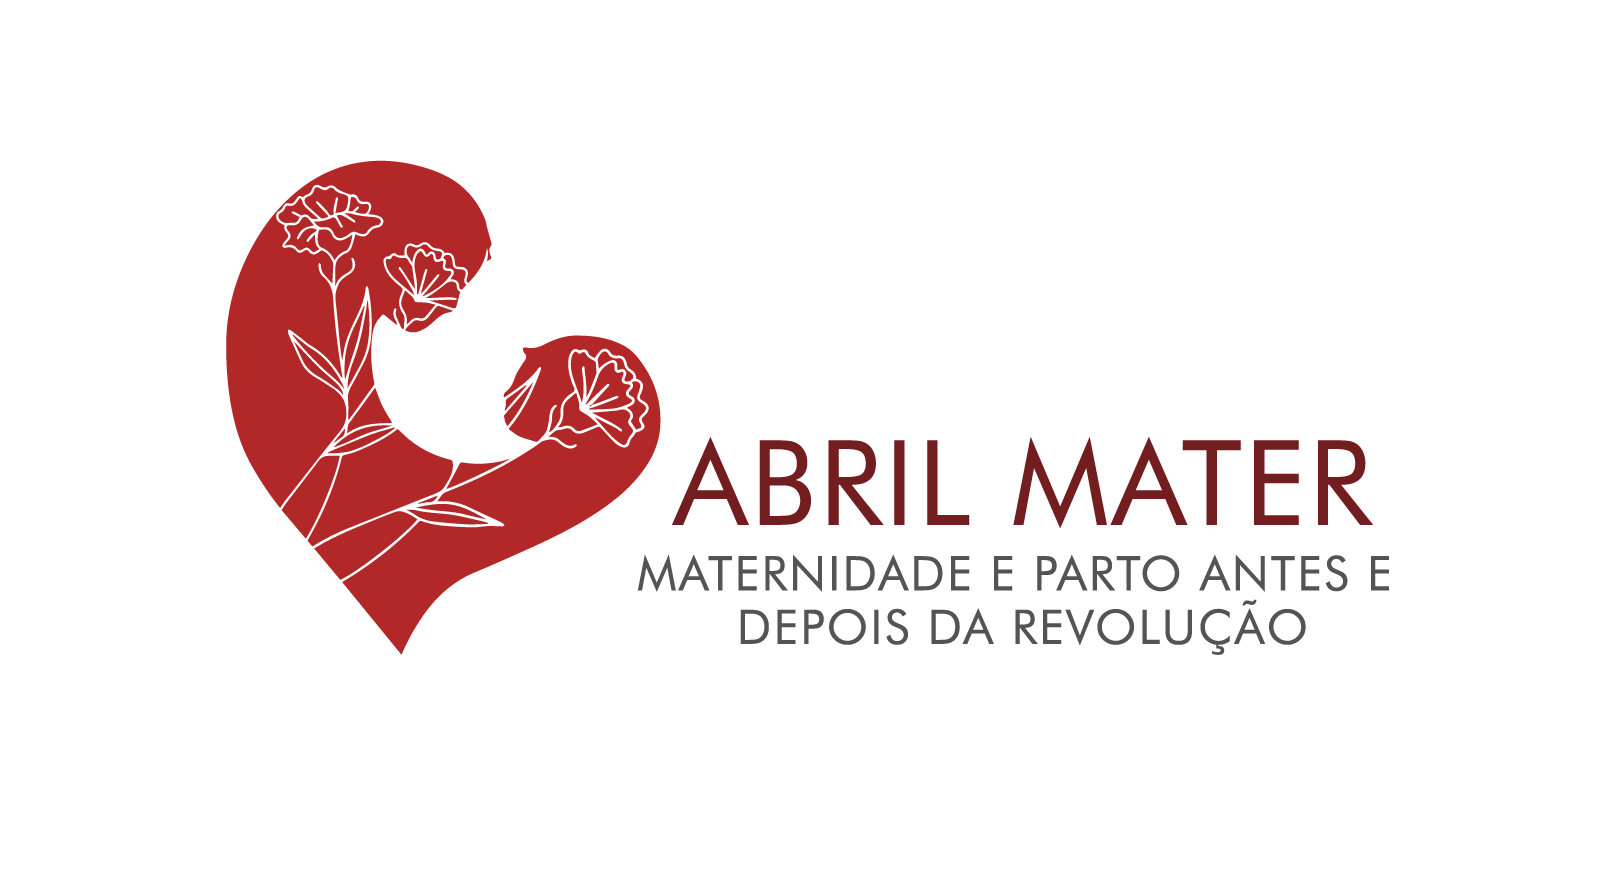 ABRIL MATER